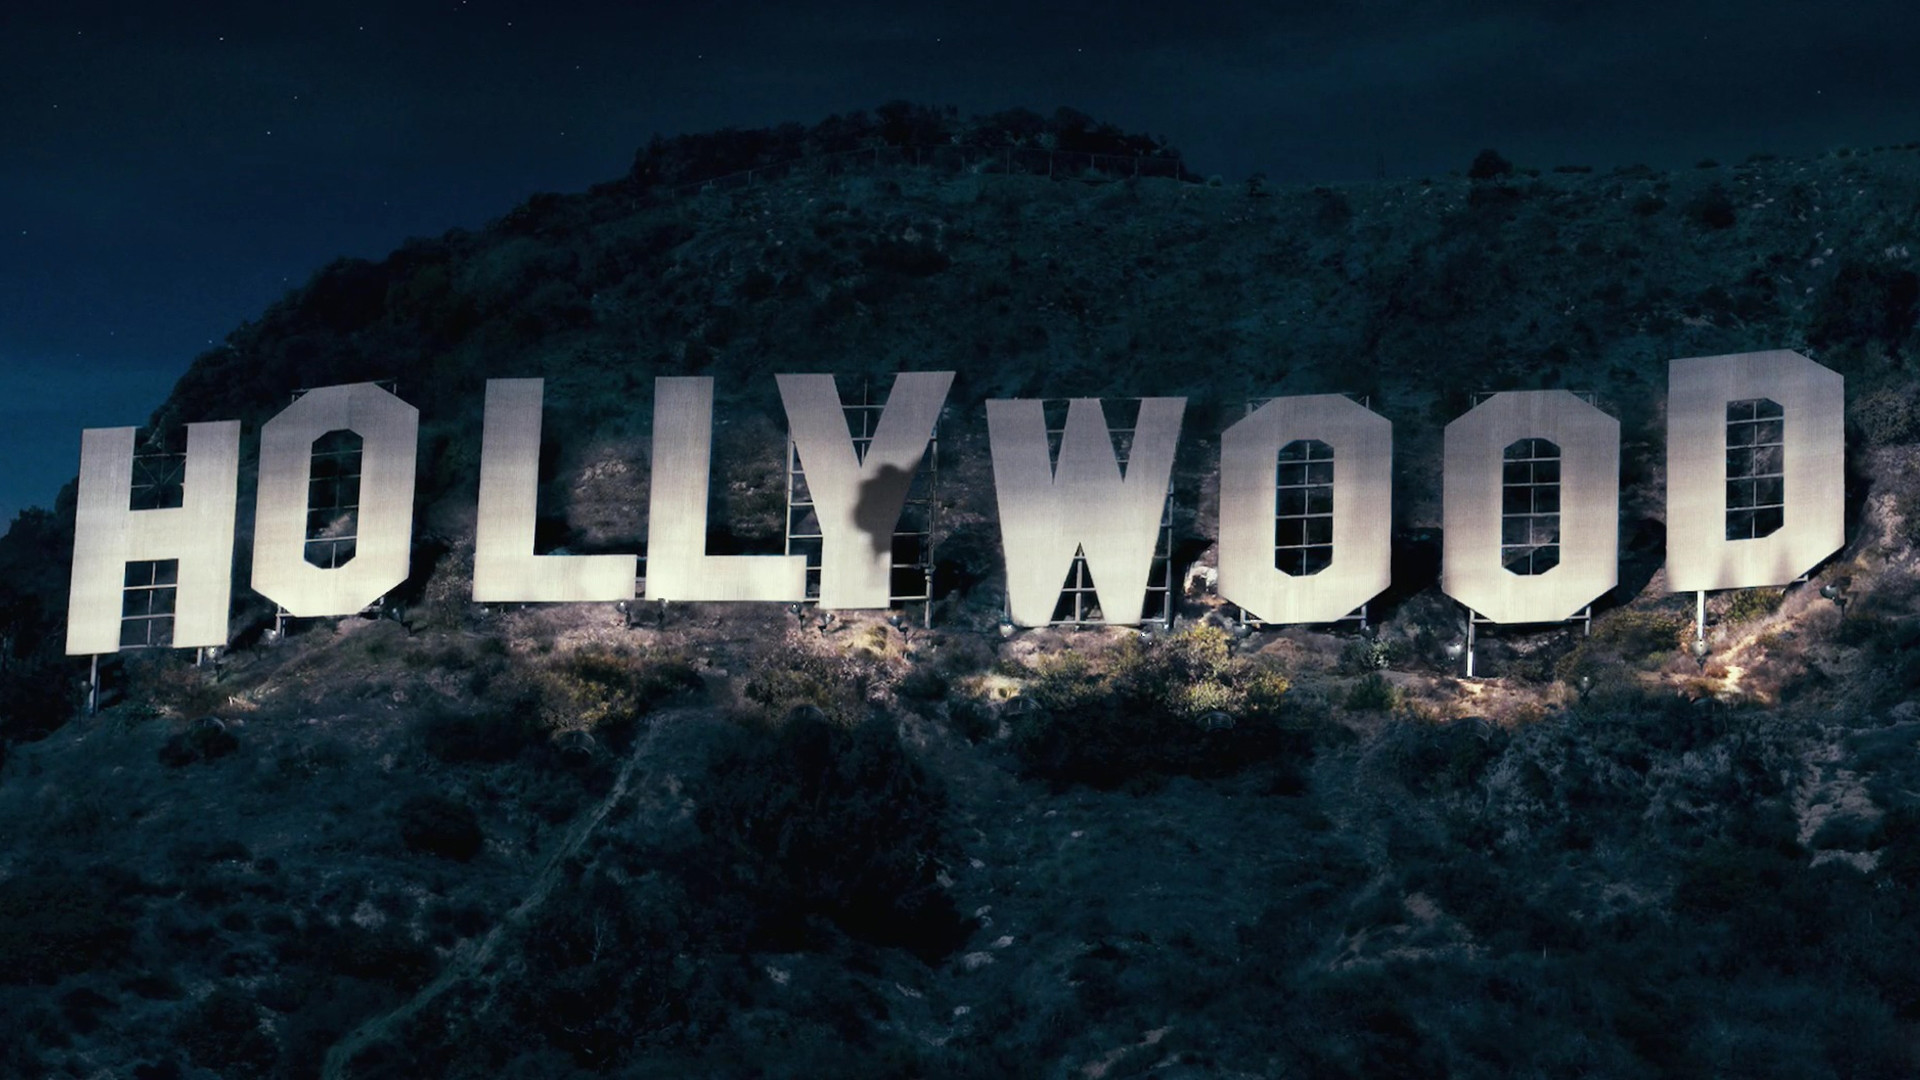 100% Quality Hollywood HD Wallpapers #DRG33DRG, High Resolution